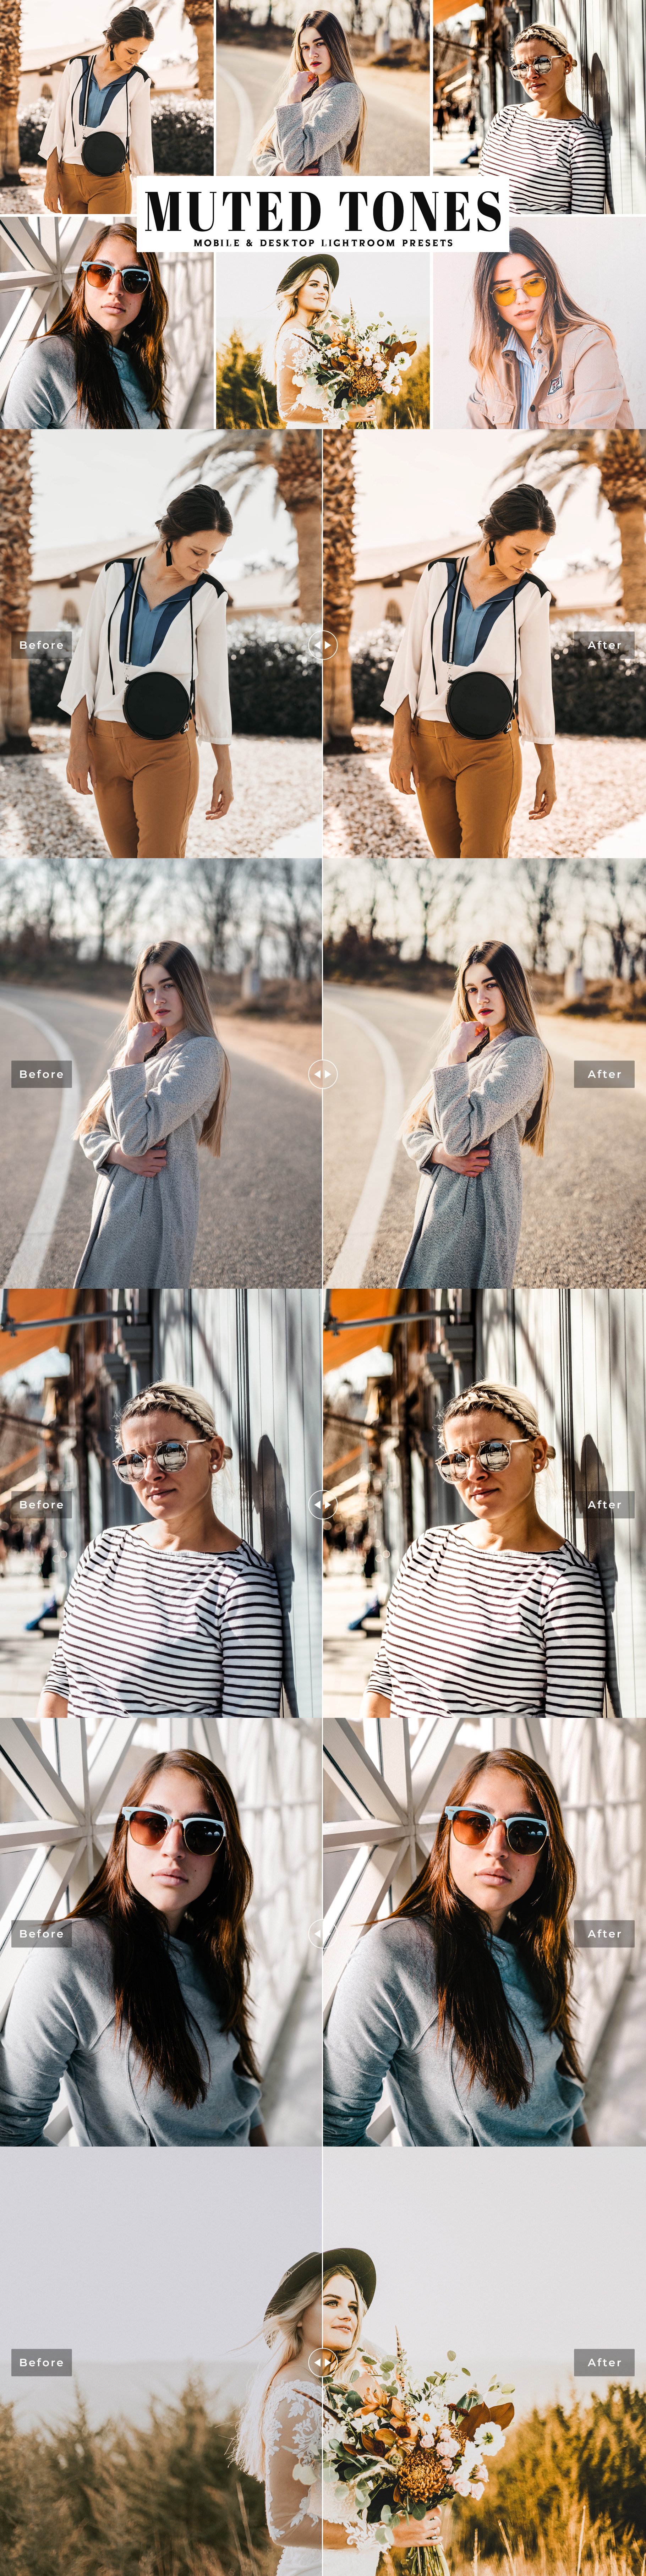 Muted Tones Lightroom Presets Packcover image.